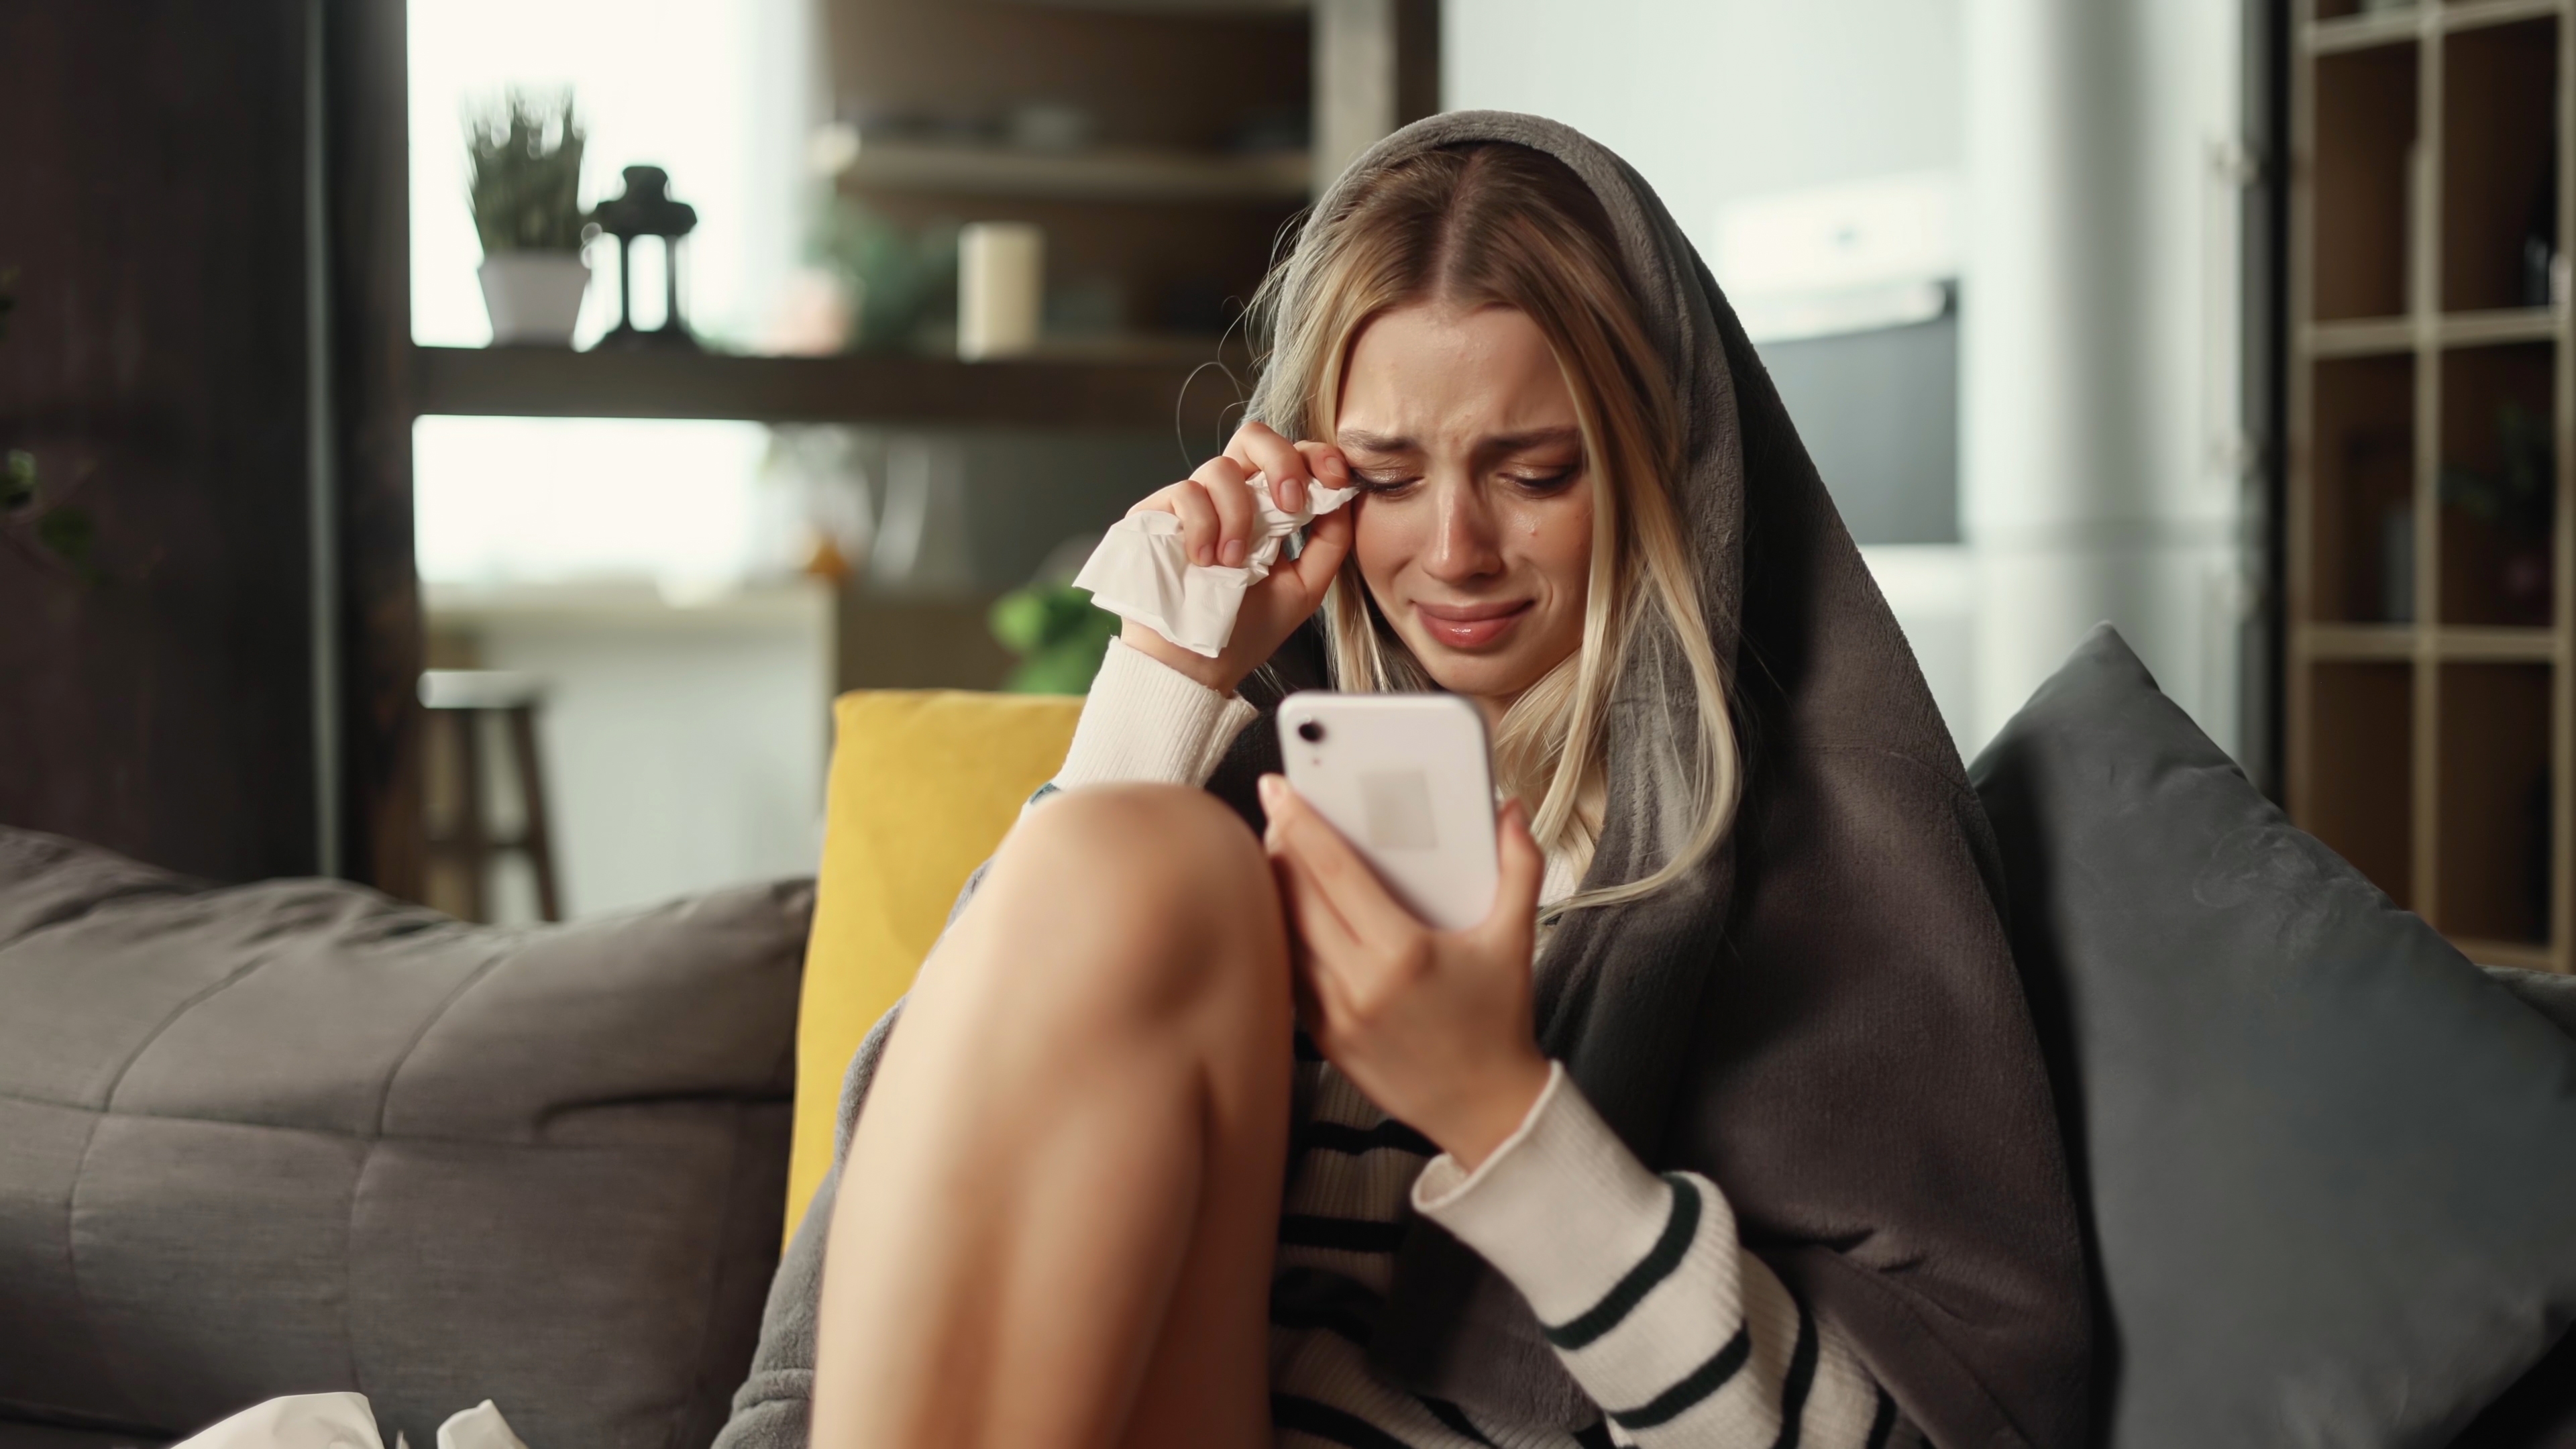 Young woman crying while using her phone | Source: Shutterstock